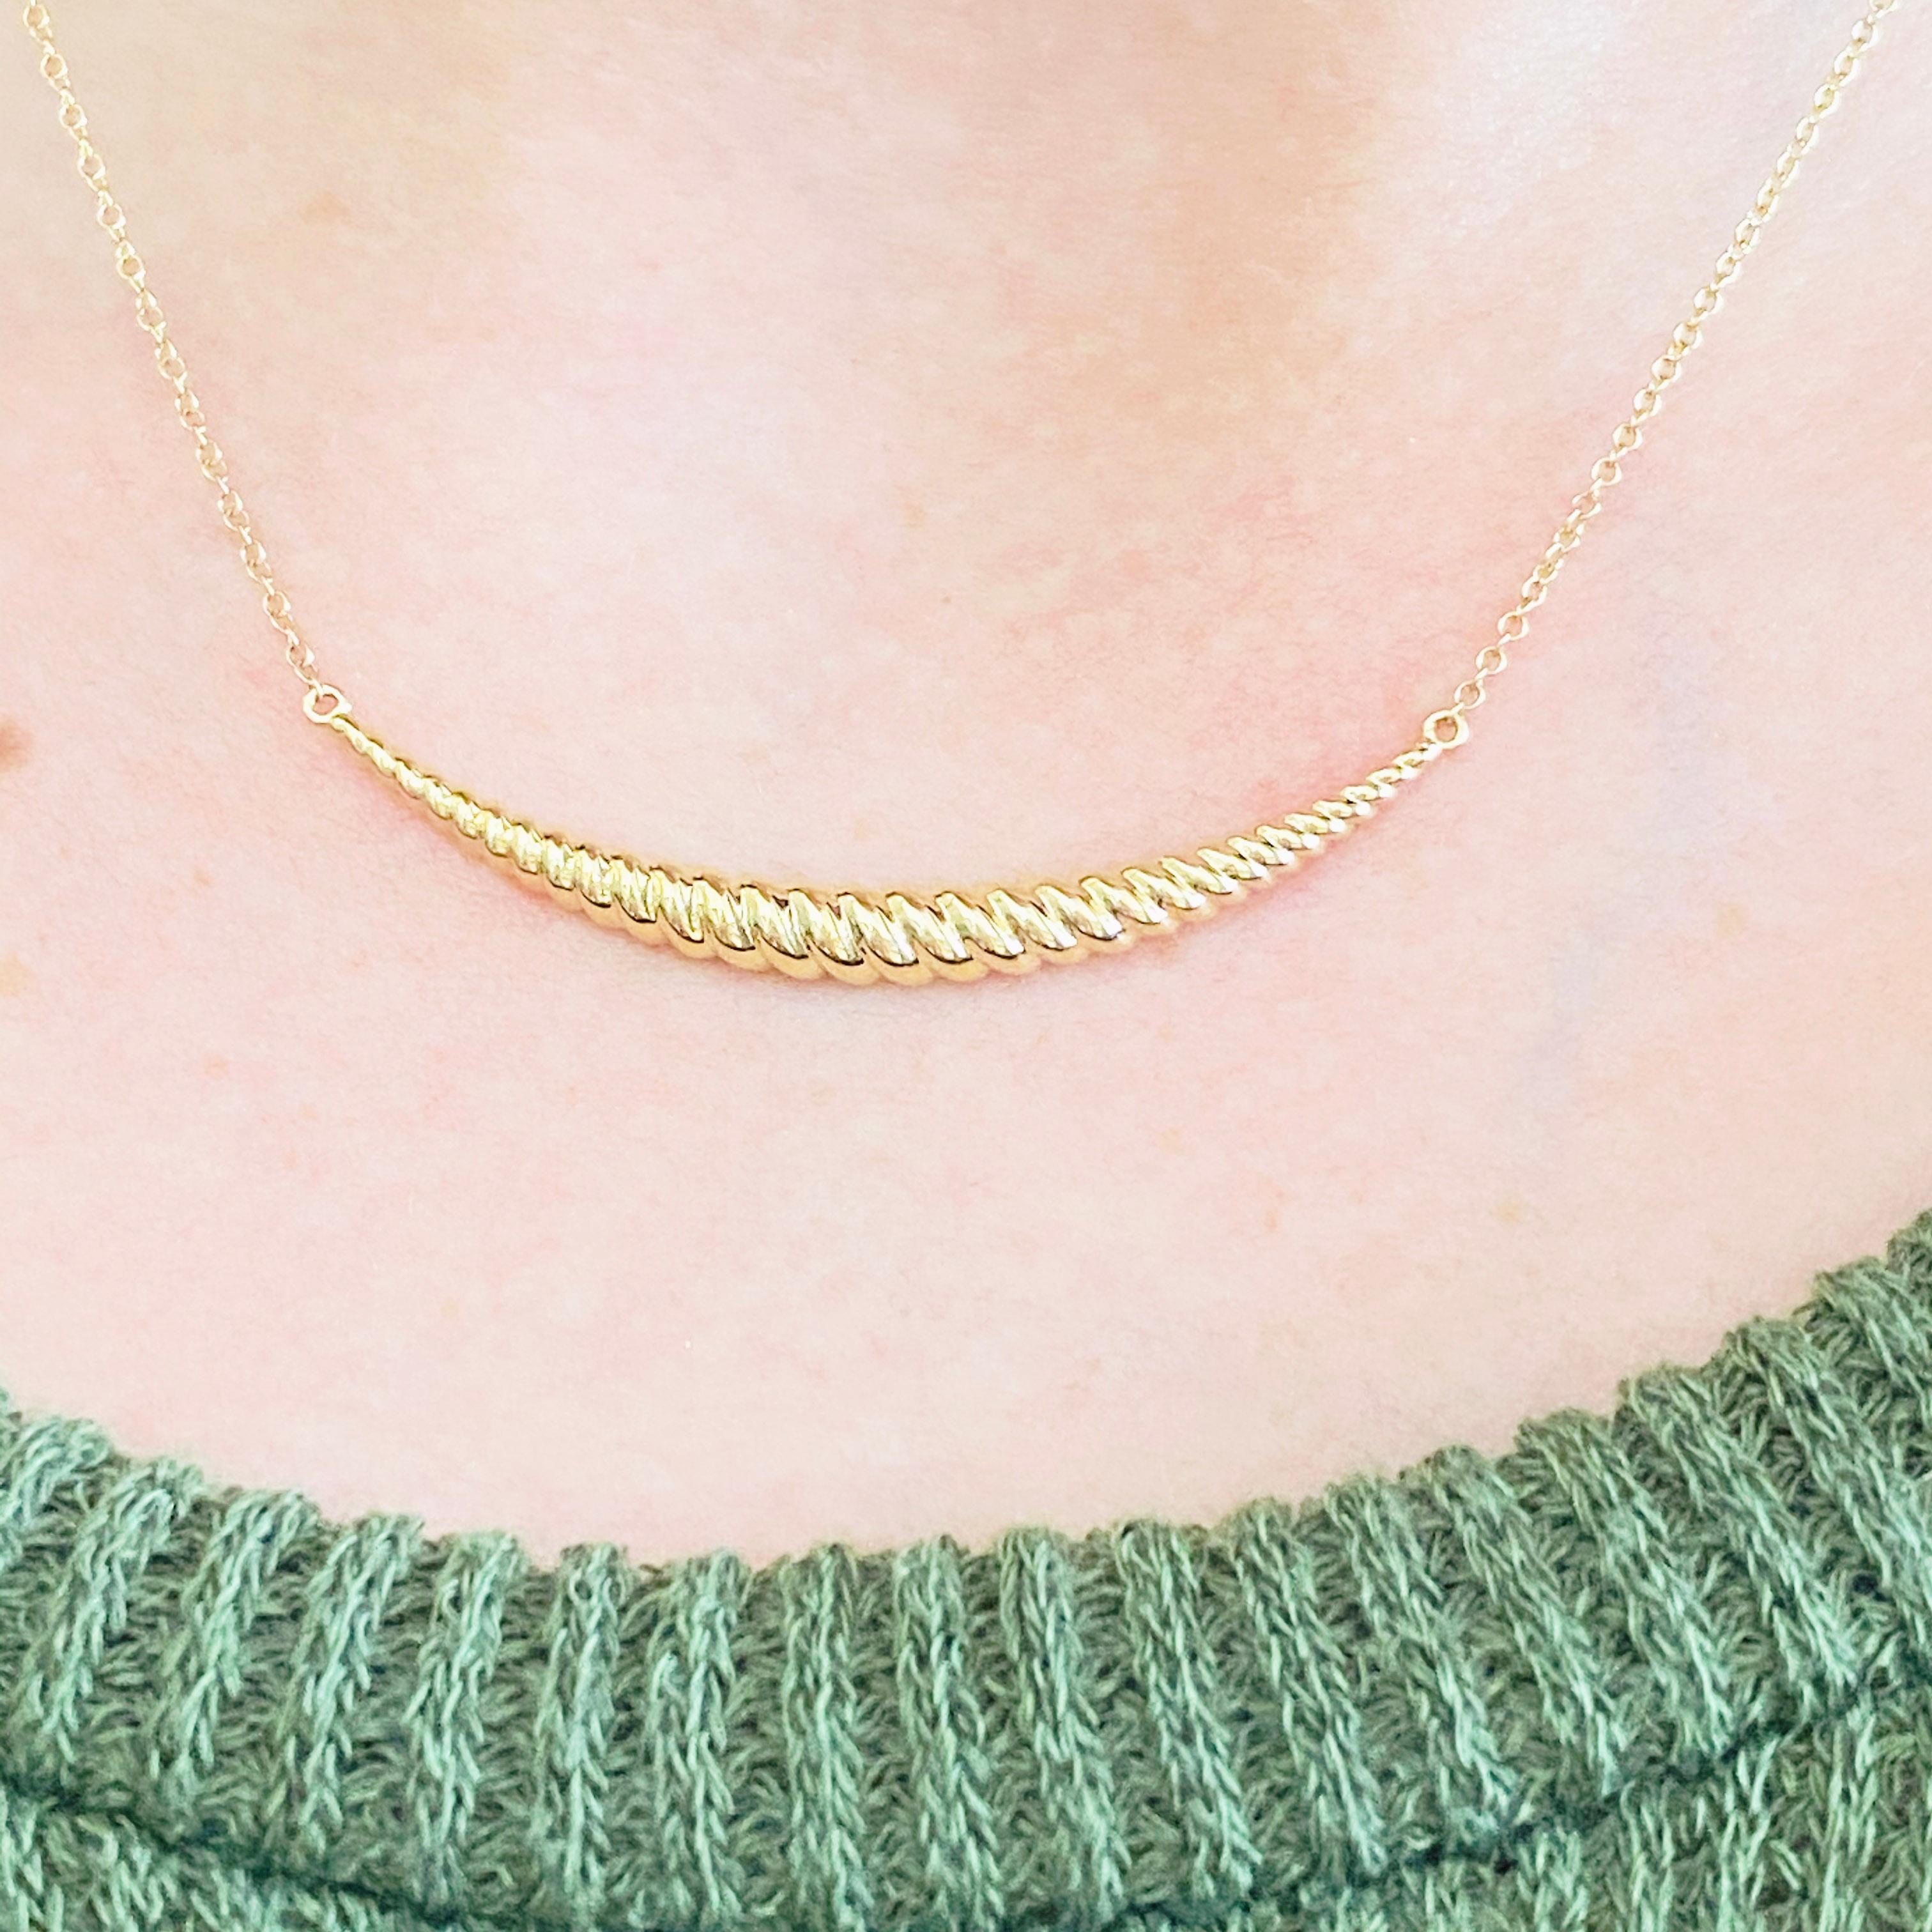 This Gabriel & Co. designer necklace is a gorgeous 14k yellow gold twisted bar necklace that is the perfect mix between classic and fashion! This necklace is very fashionable and can add a touch of style to any outfit, yet it is also classy enough